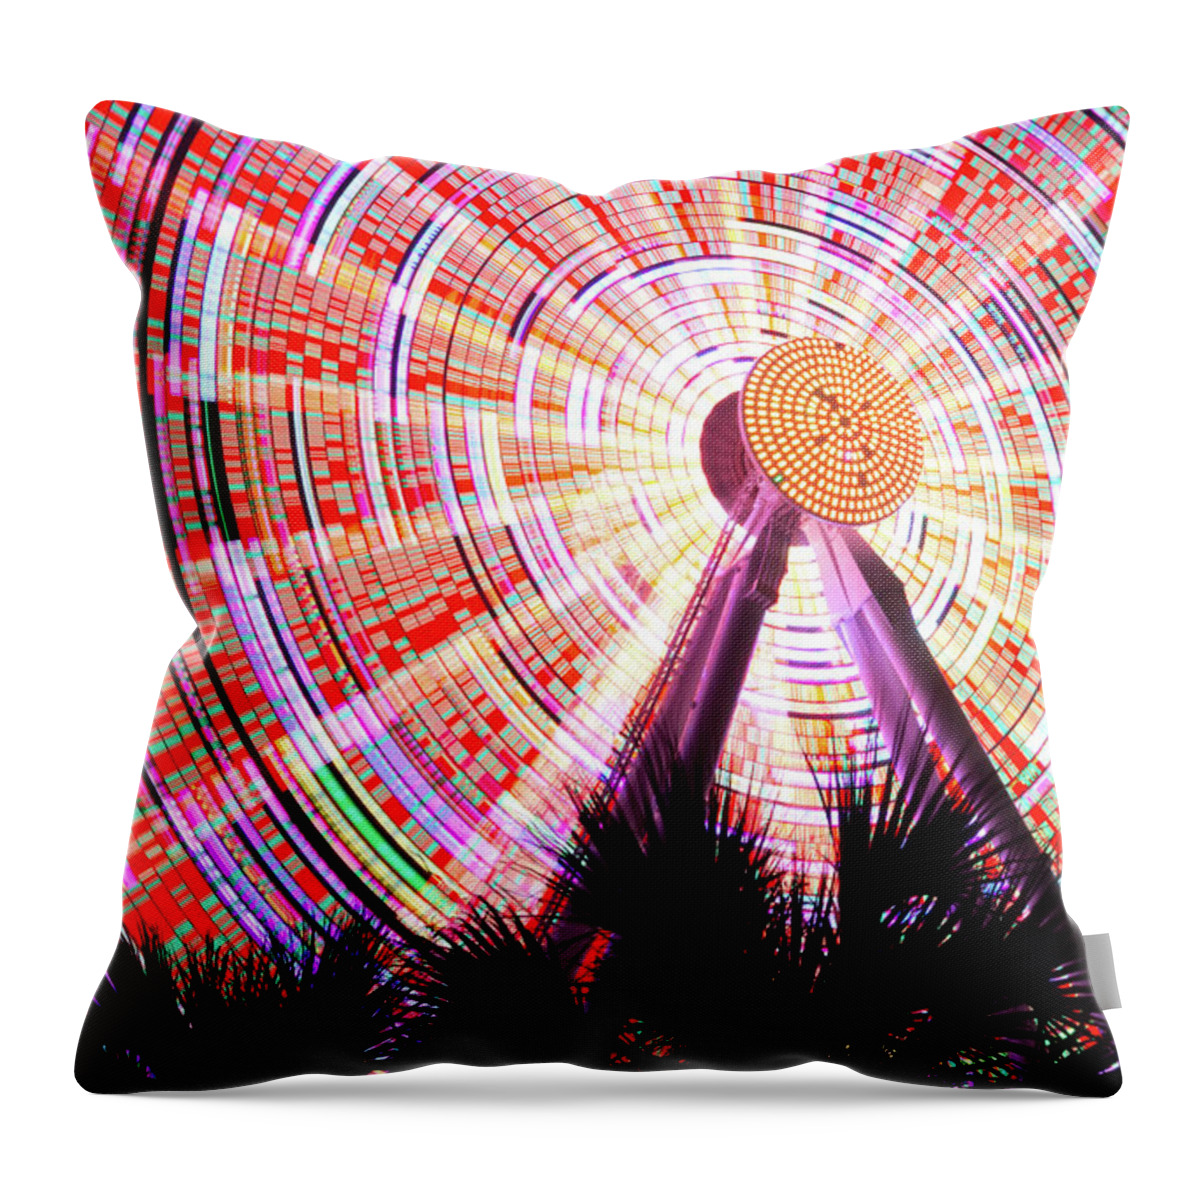 Skywheel Throw Pillow featuring the photograph Myrtle Beach Skywheel by Dave Guy